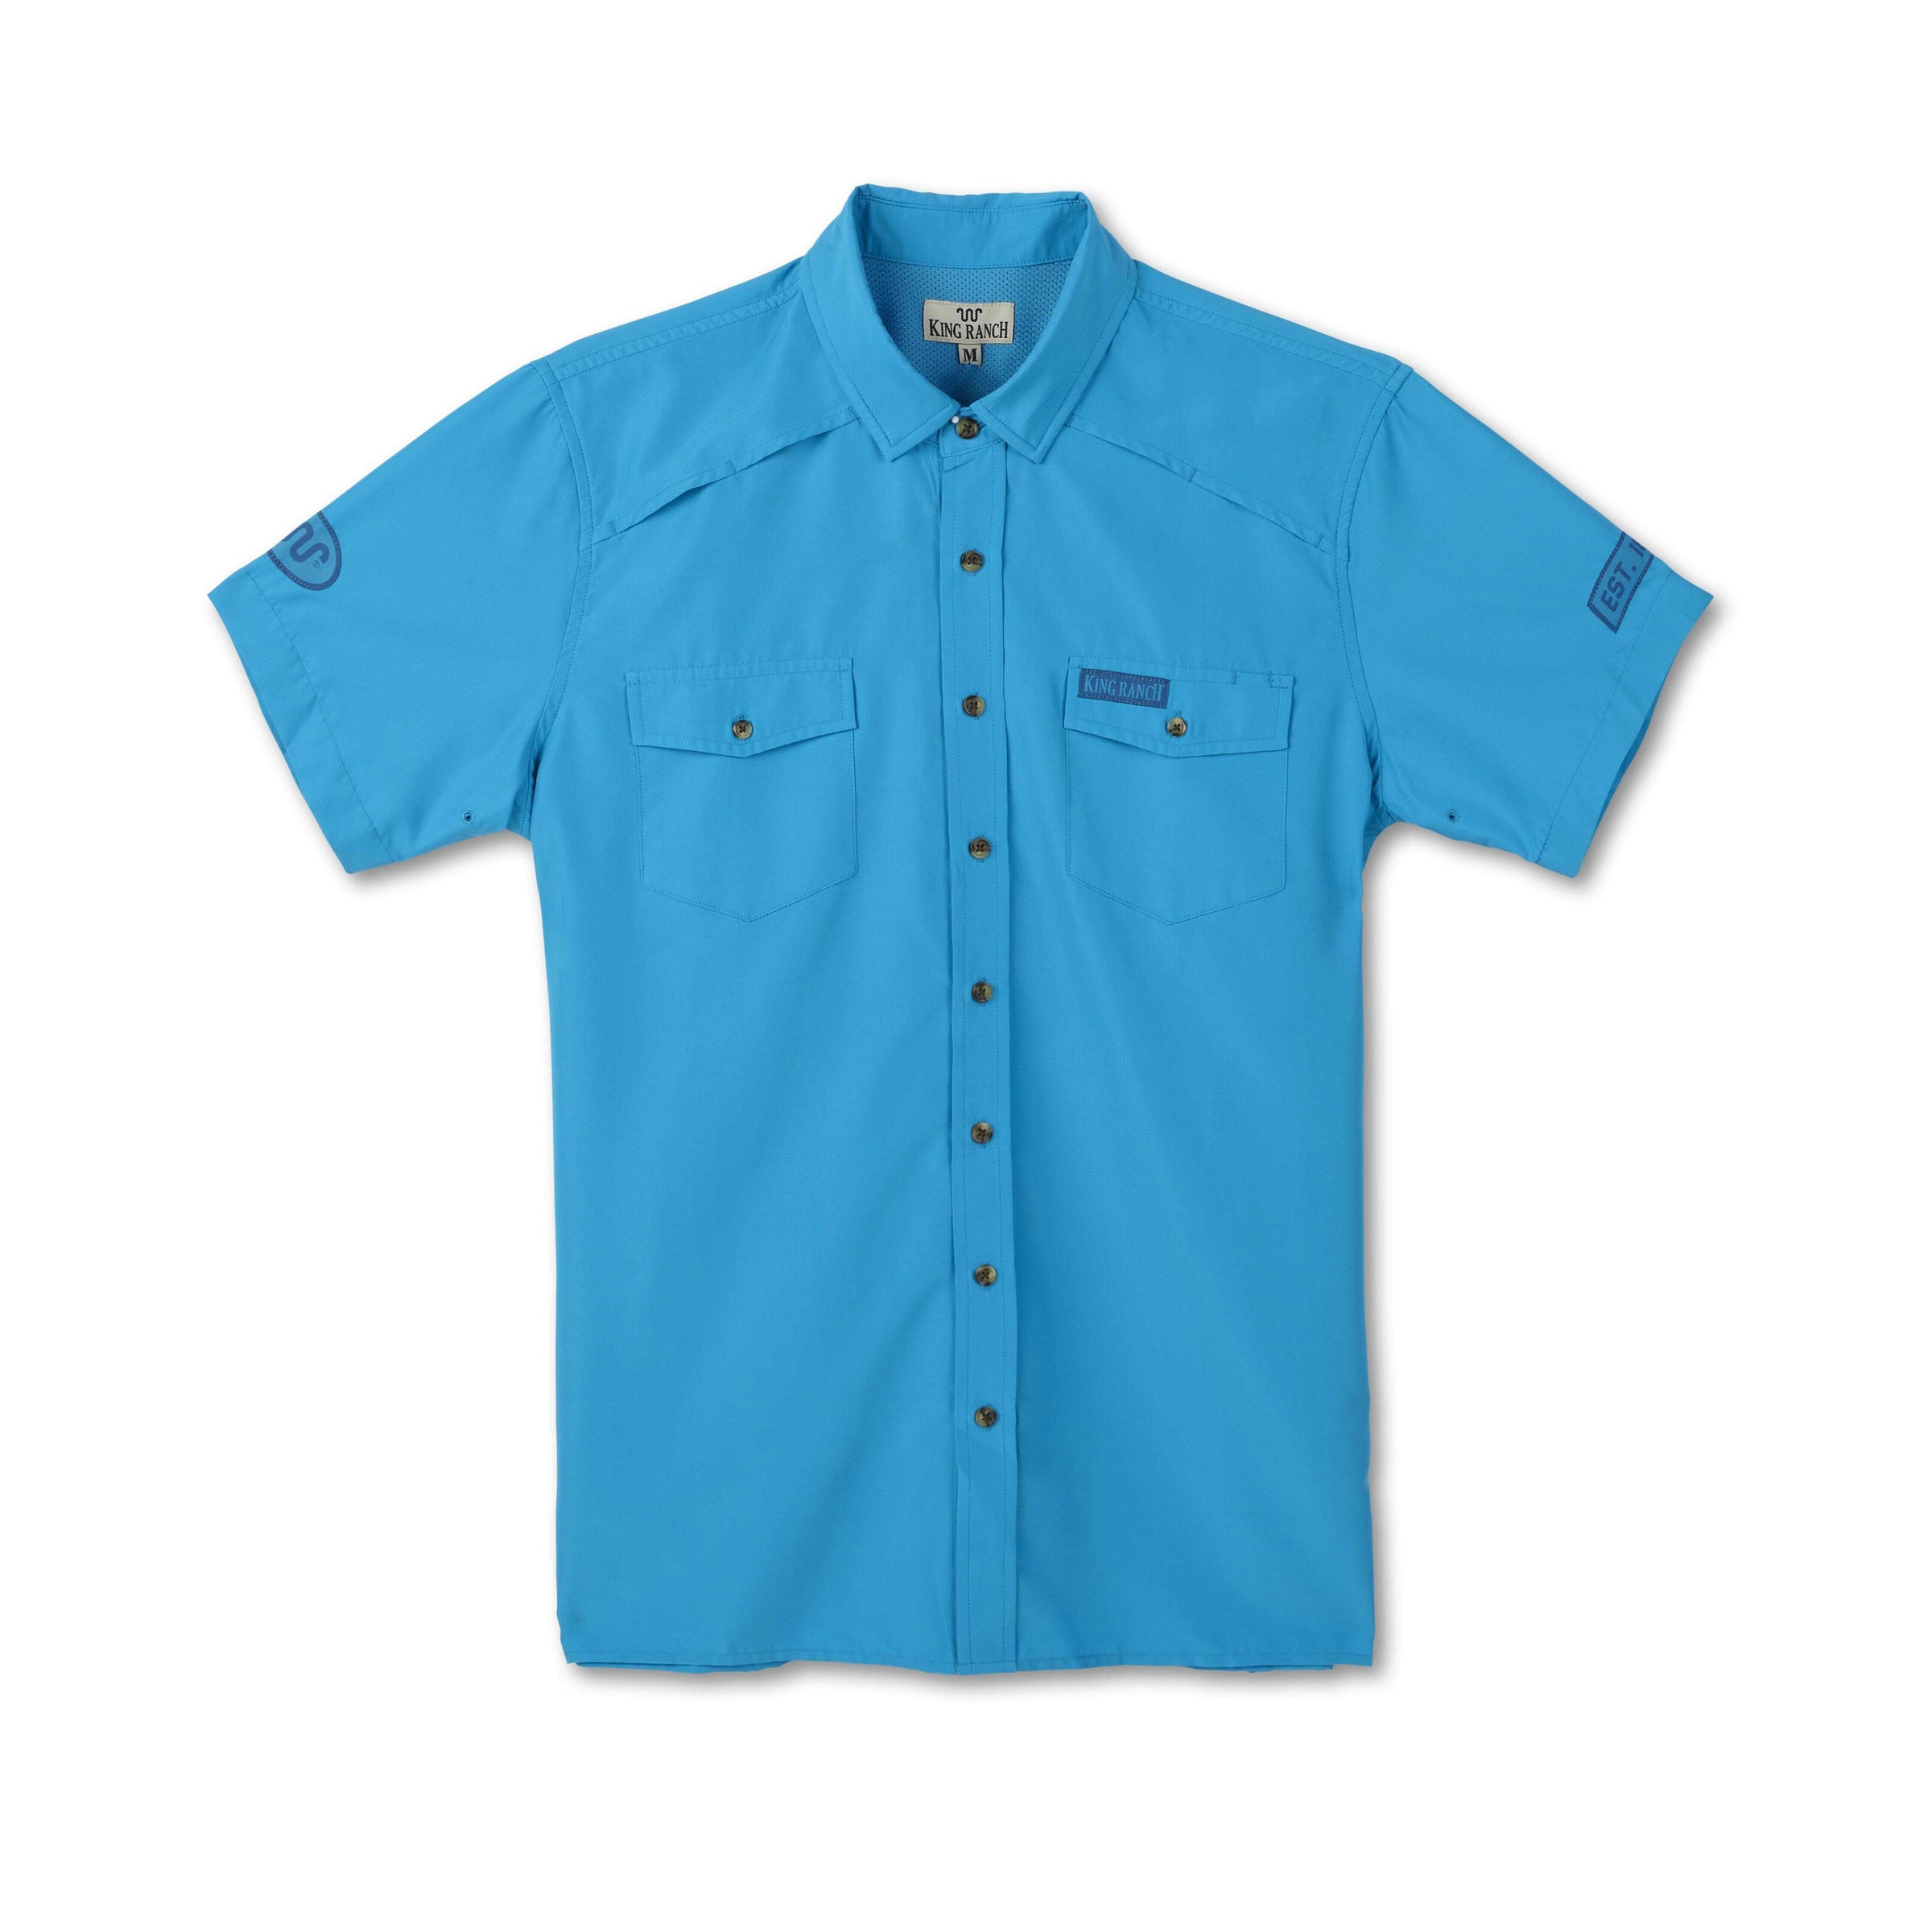 S/S Classic Fishing Shirt with KR Badges – King Ranch Saddle Shop